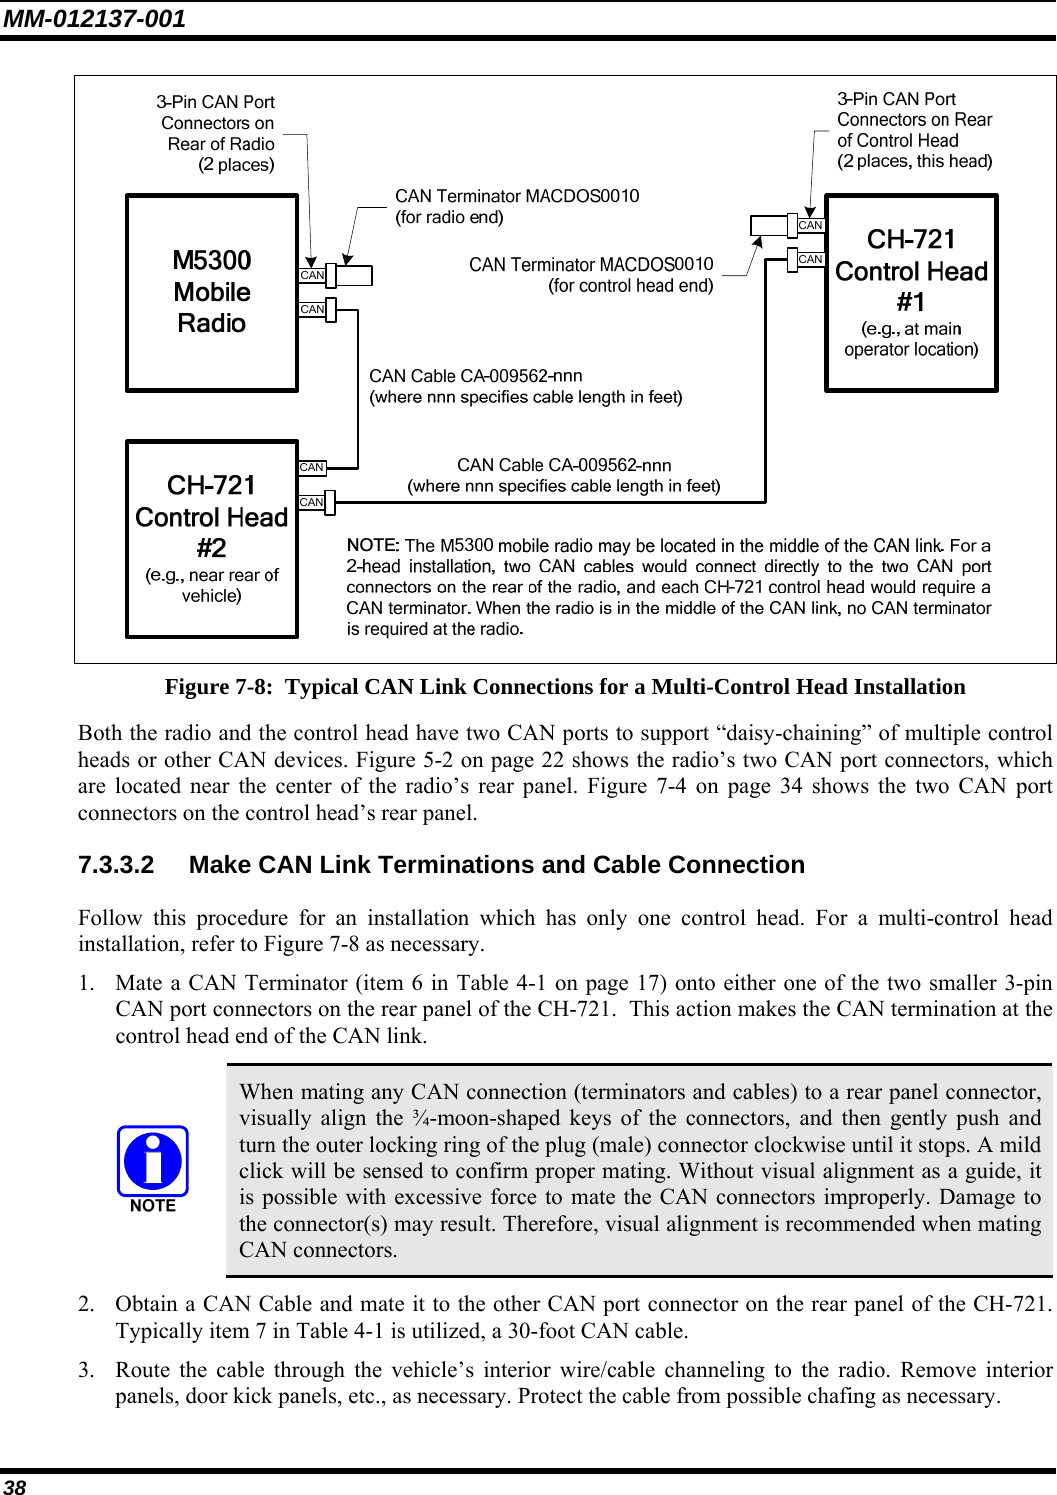 MM-012137-001 38  Figure 7-8:  Typical CAN Link Connections for a Multi-Control Head Installation Both the radio and the control head have two CAN ports to support “daisy-chaining” of multiple control heads or other CAN devices. Figure 5-2 on page 22 shows the radio’s two CAN port connectors, which are located near the center of the radio’s rear panel. Figure 7-4 on page 34 shows the two CAN port connectors on the control head’s rear panel. 7.3.3.2  Make CAN Link Terminations and Cable Connection Follow this procedure for an installation which has only one control head. For a multi-control head installation, refer to Figure 7-8 as necessary. 1. Mate a CAN Terminator (item 6 in Table 4-1 on page 17) onto either one of the two smaller 3-pin CAN port connectors on the rear panel of the CH-721.  This action makes the CAN termination at the control head end of the CAN link.   When mating any CAN connection (terminators and cables) to a rear panel connector, visually align the ¾-moon-shaped keys of the connectors, and then gently push and turn the outer locking ring of the plug (male) connector clockwise until it stops. A mild click will be sensed to confirm proper mating. Without visual alignment as a guide, it is possible with excessive force to mate the CAN connectors improperly. Damage to the connector(s) may result. Therefore, visual alignment is recommended when mating CAN connectors. 2. Obtain a CAN Cable and mate it to the other CAN port connector on the rear panel of the CH-721. Typically item 7 in Table 4-1 is utilized, a 30-foot CAN cable. 3. Route the cable through the vehicle’s interior wire/cable channeling to the radio. Remove interior panels, door kick panels, etc., as necessary. Protect the cable from possible chafing as necessary. 